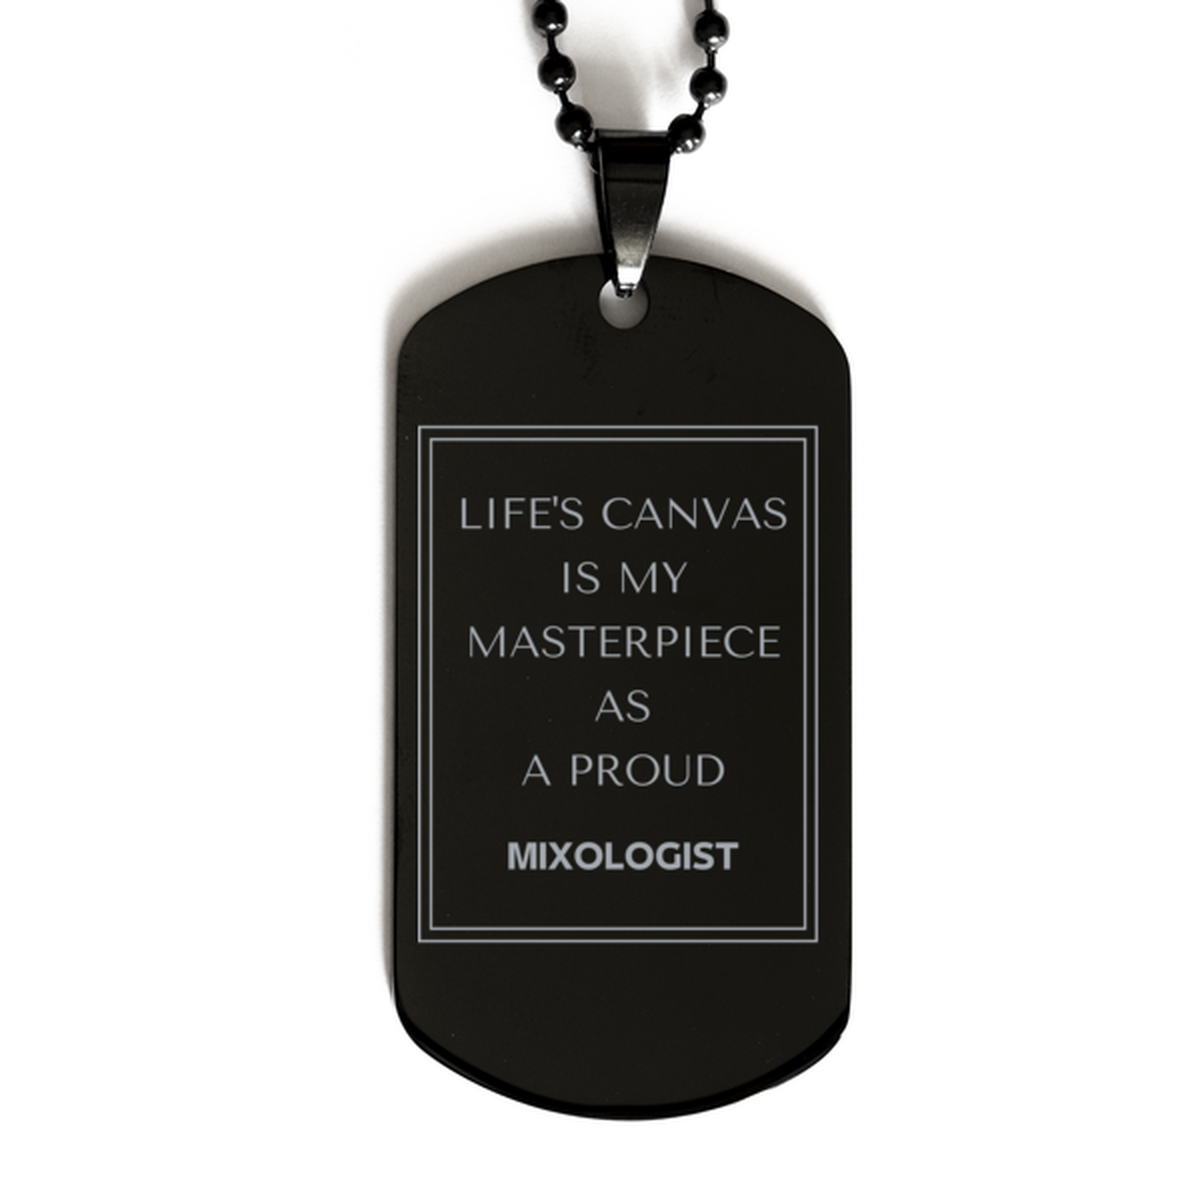 Proud Mixologist Gifts, Life's canvas is my masterpiece, Epic Birthday Christmas Unique Black Dog Tag For Mixologist, Coworkers, Men, Women, Friends